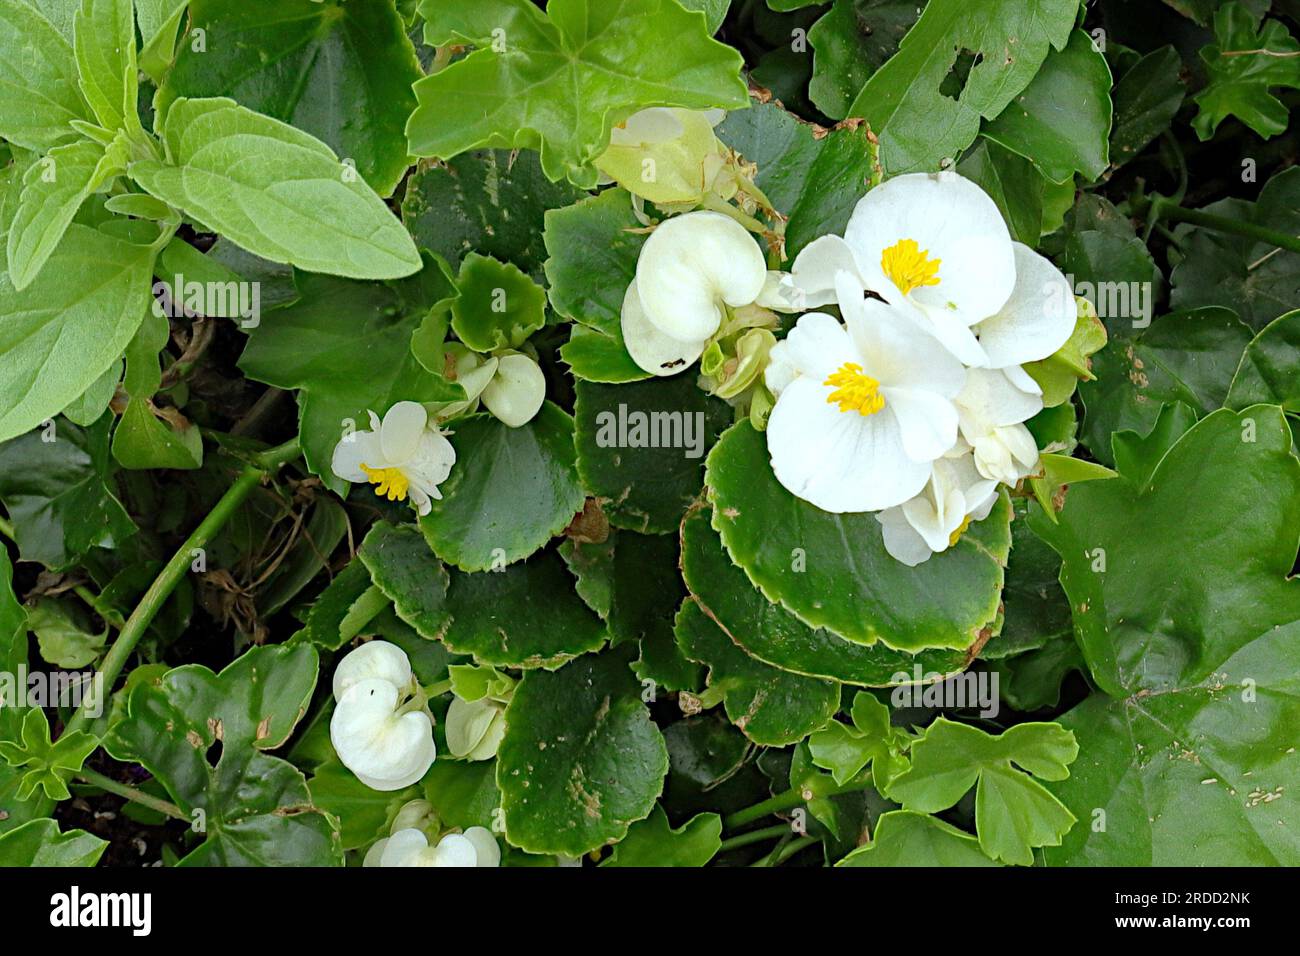 Cluster of white and yellow wax begonia flowers set against a background of waxy green leaves, green foliage. Stock Photo